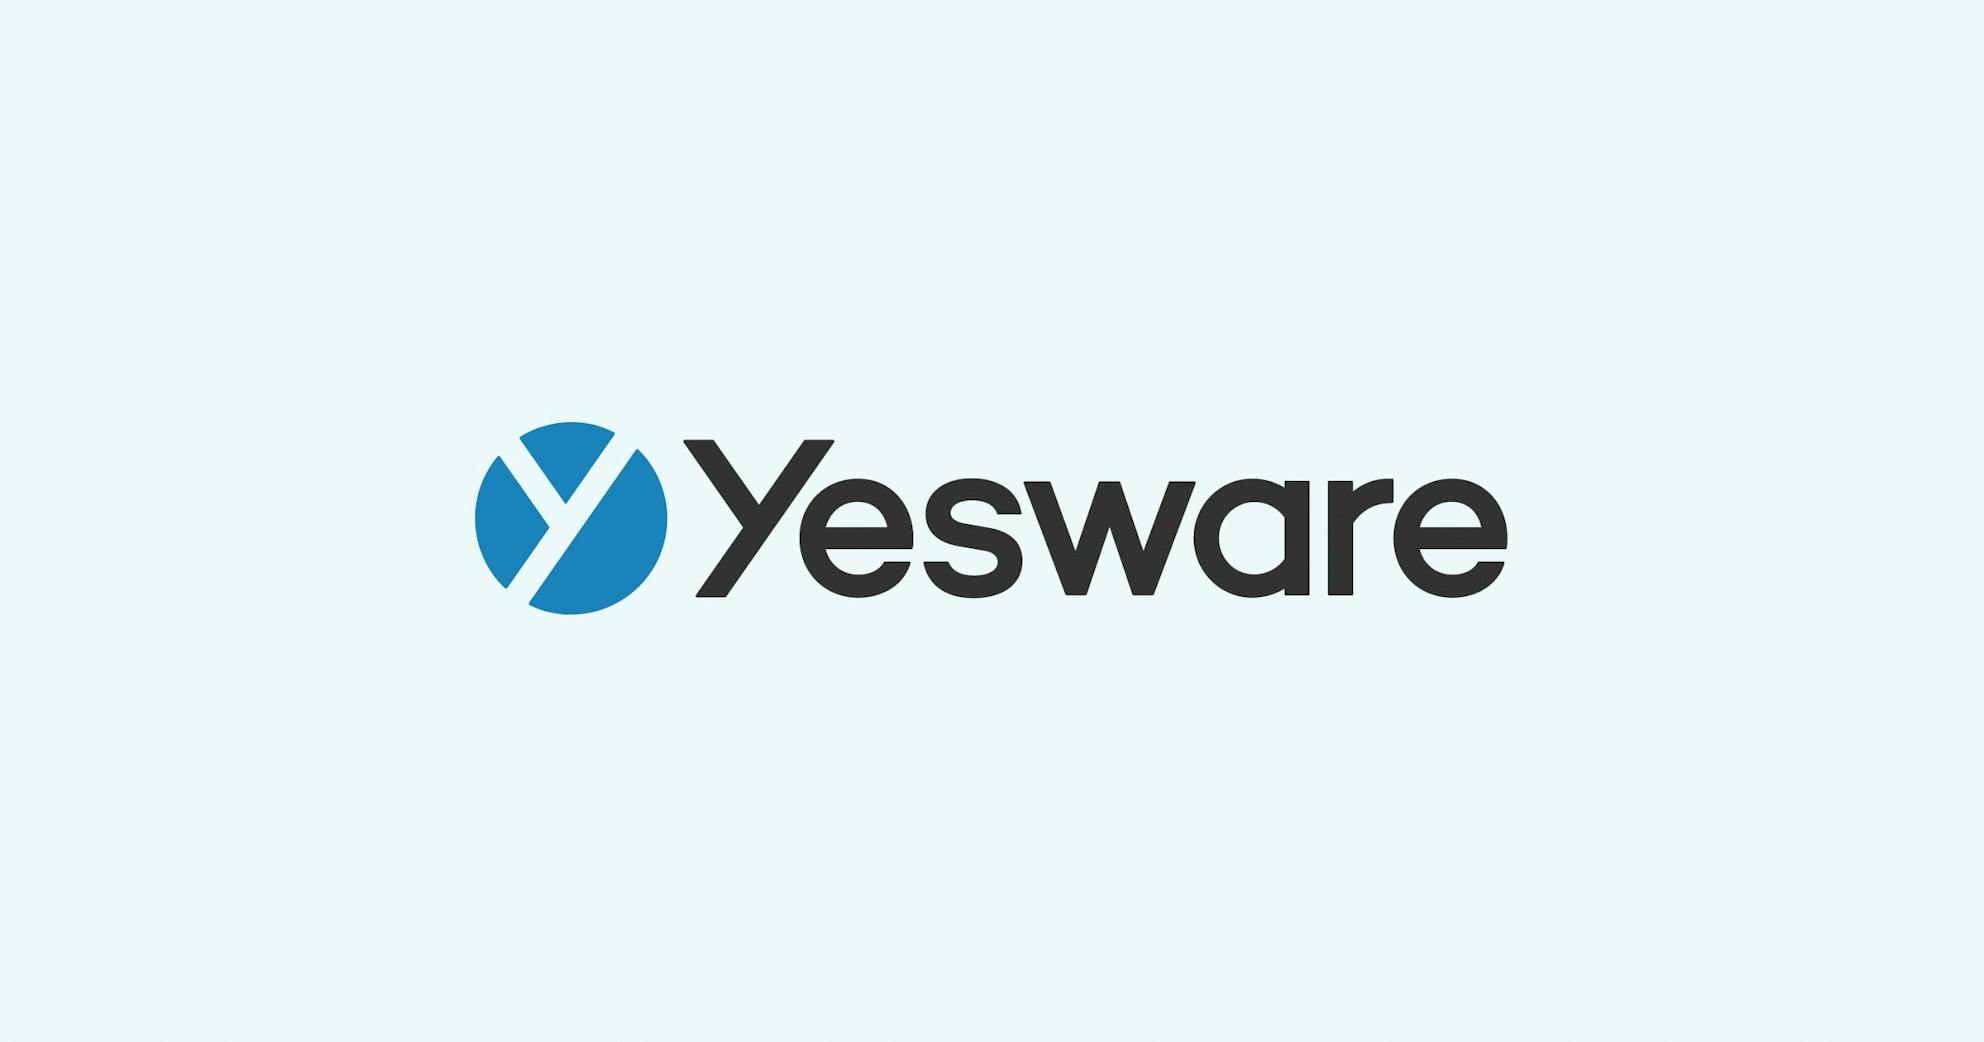 The Yesware Follow Up